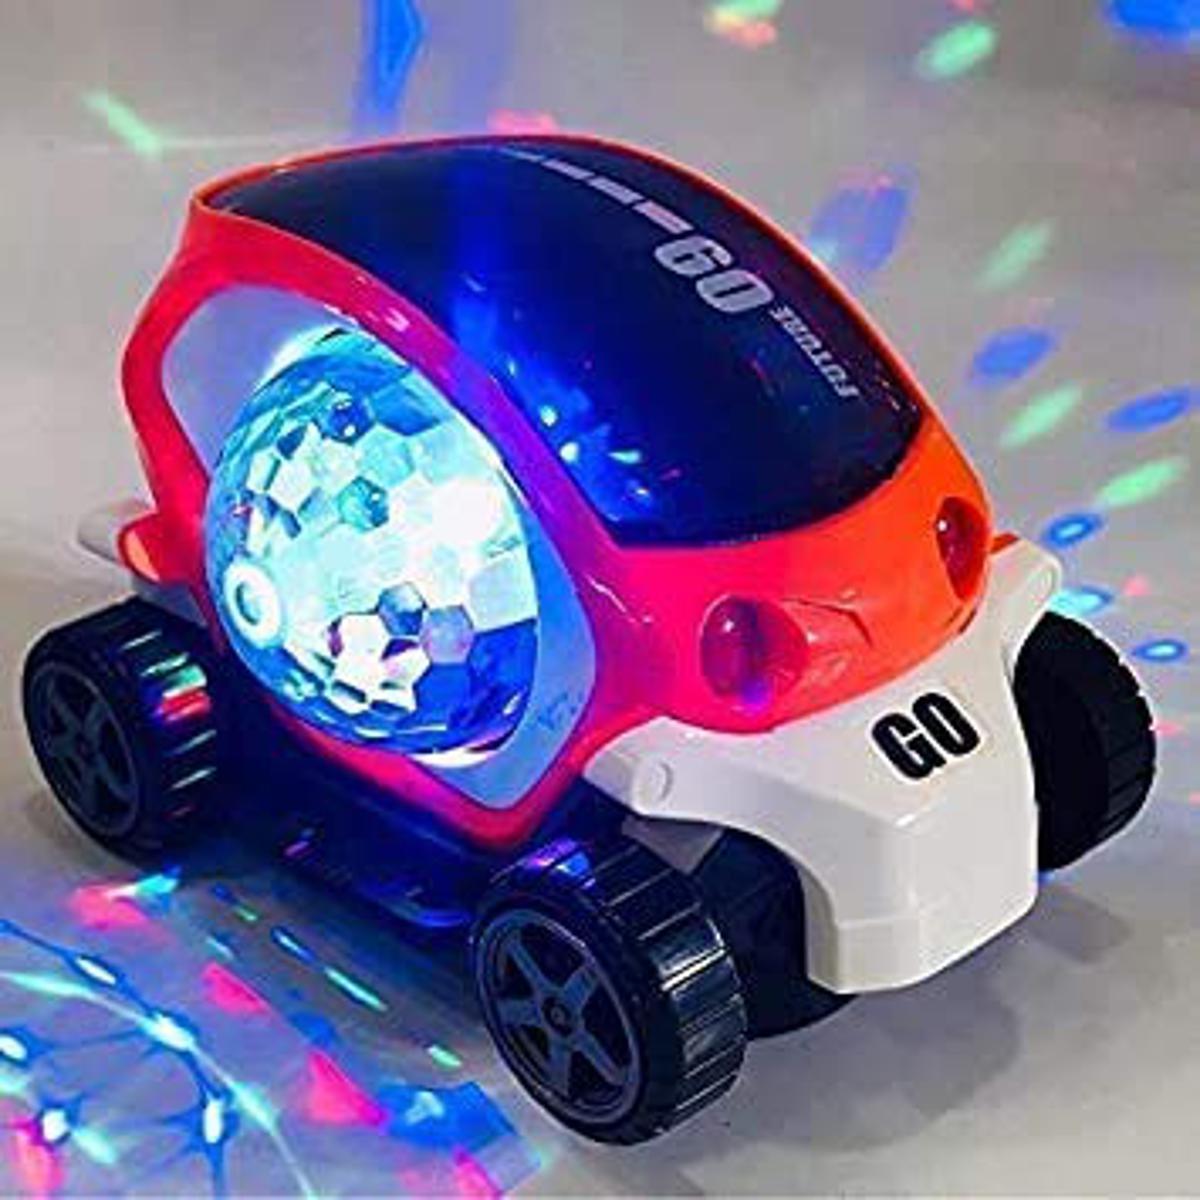 Car Toy For Kids 09 - Multicolor